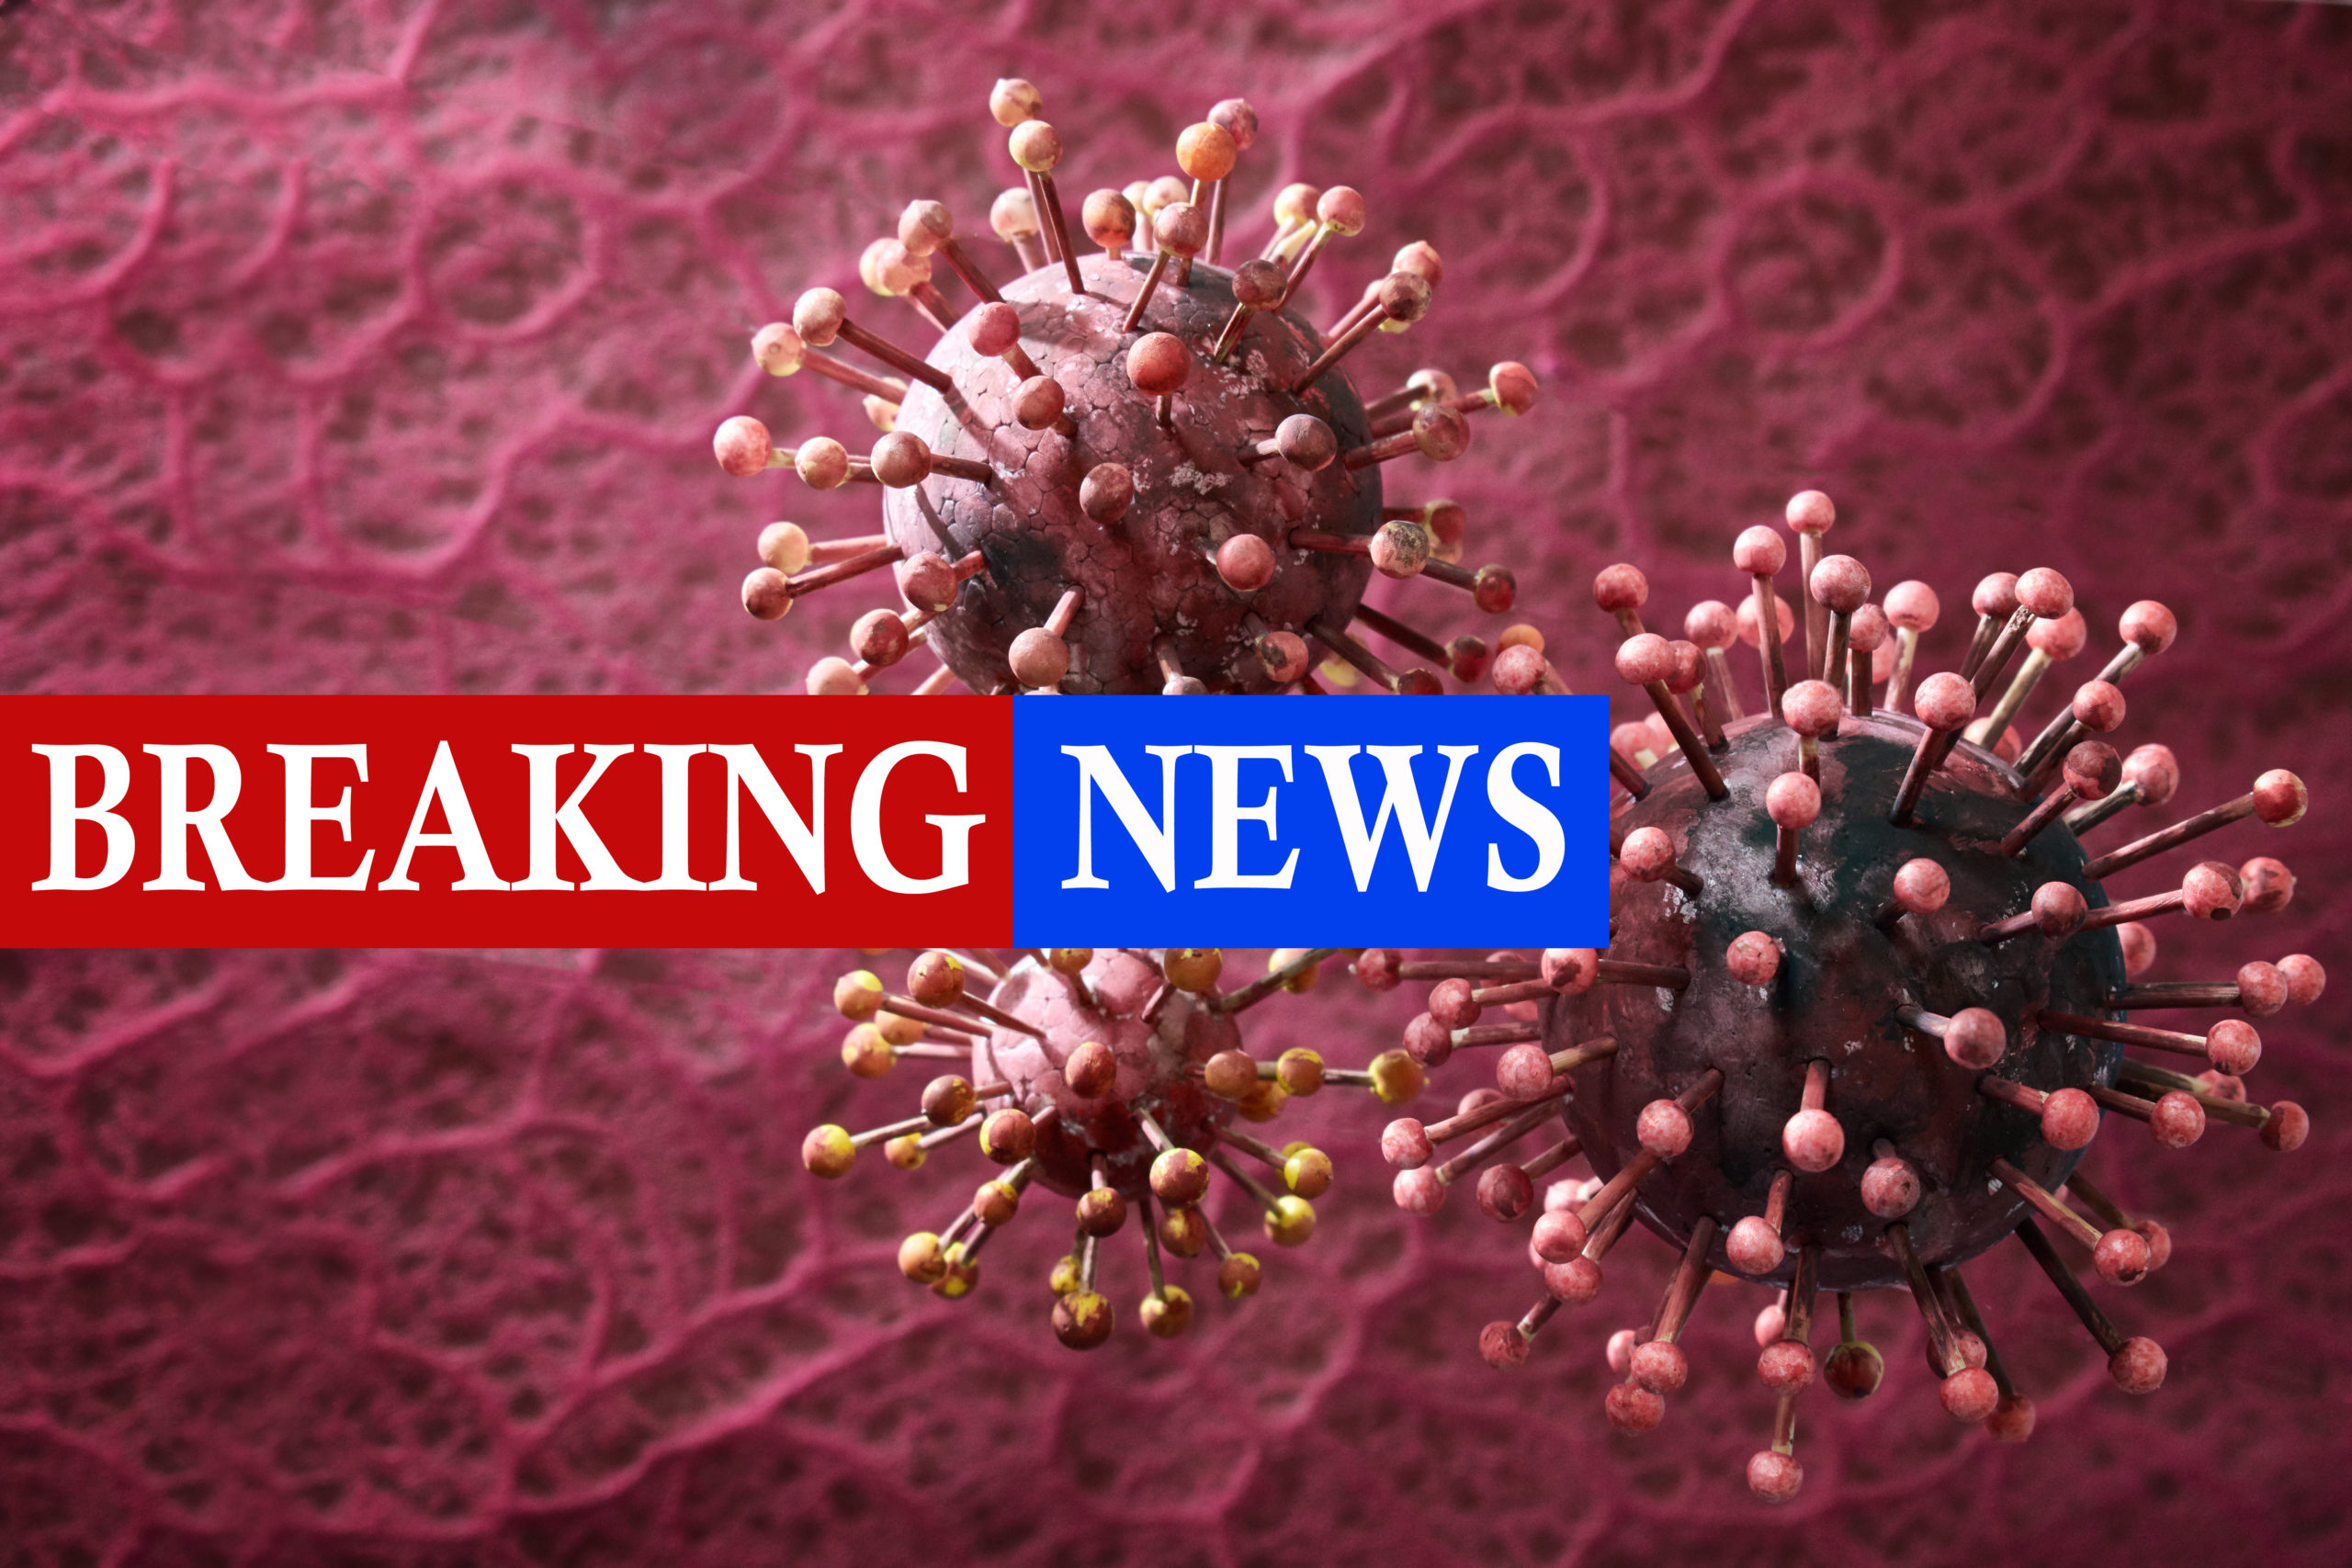 Breaking News Covid 19 Concept Isolated On Coronavirus Simulation Cell Red Background. By Xinlan Scaled